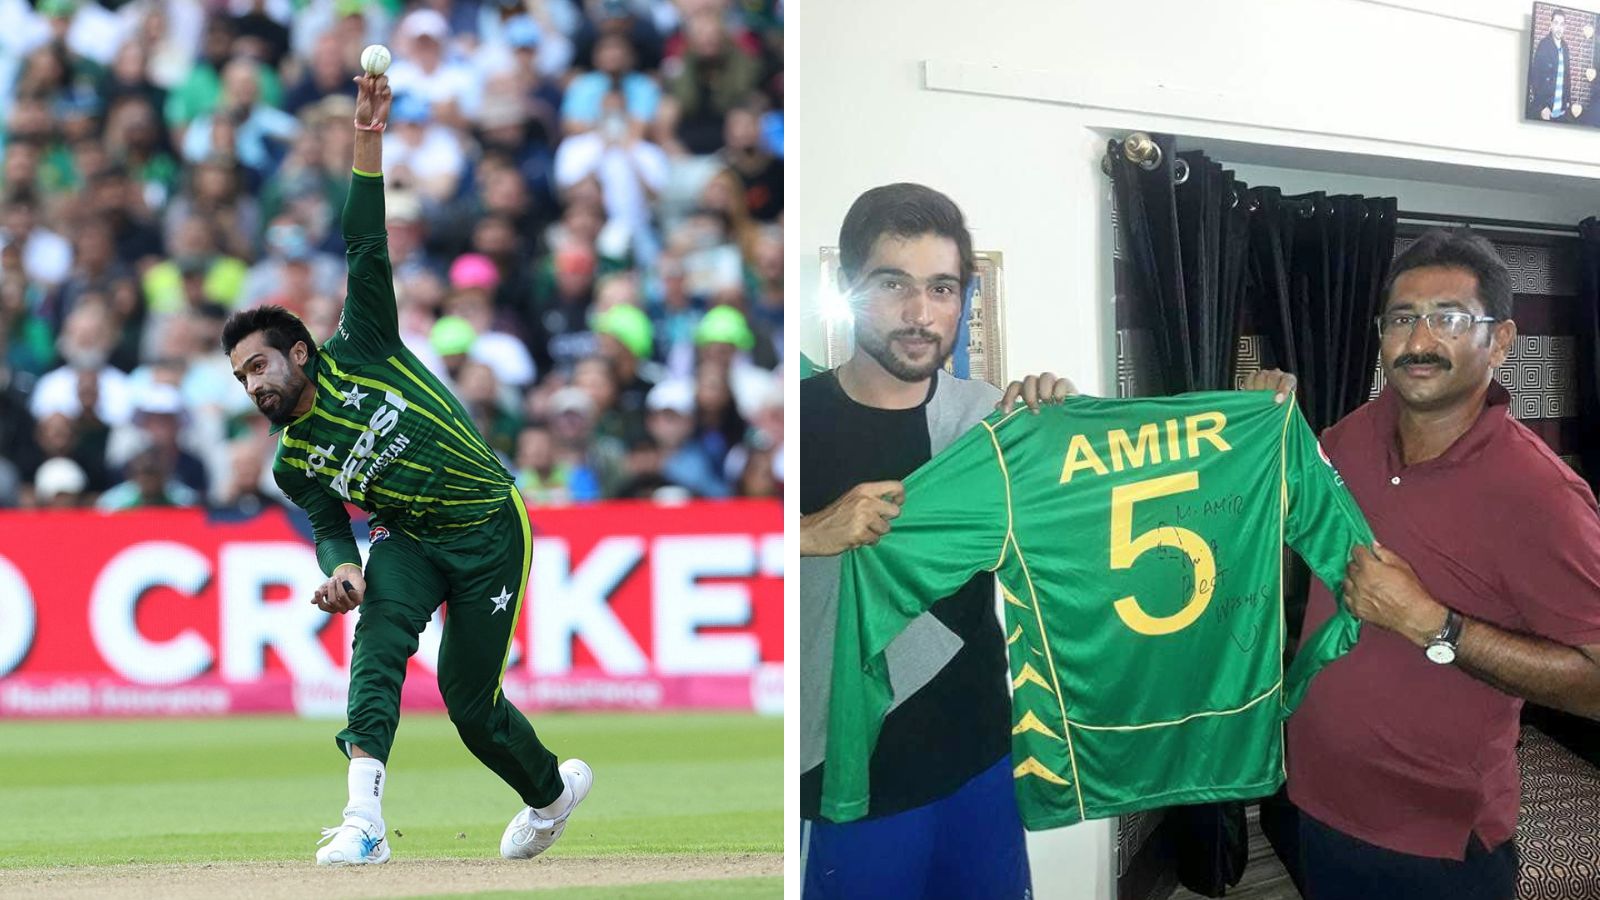 t20-world-cup-pakistan-s-mohammad-amir-once-tipped-to-be-better-than-wasim-akram-now-making-another-comeback-at-32